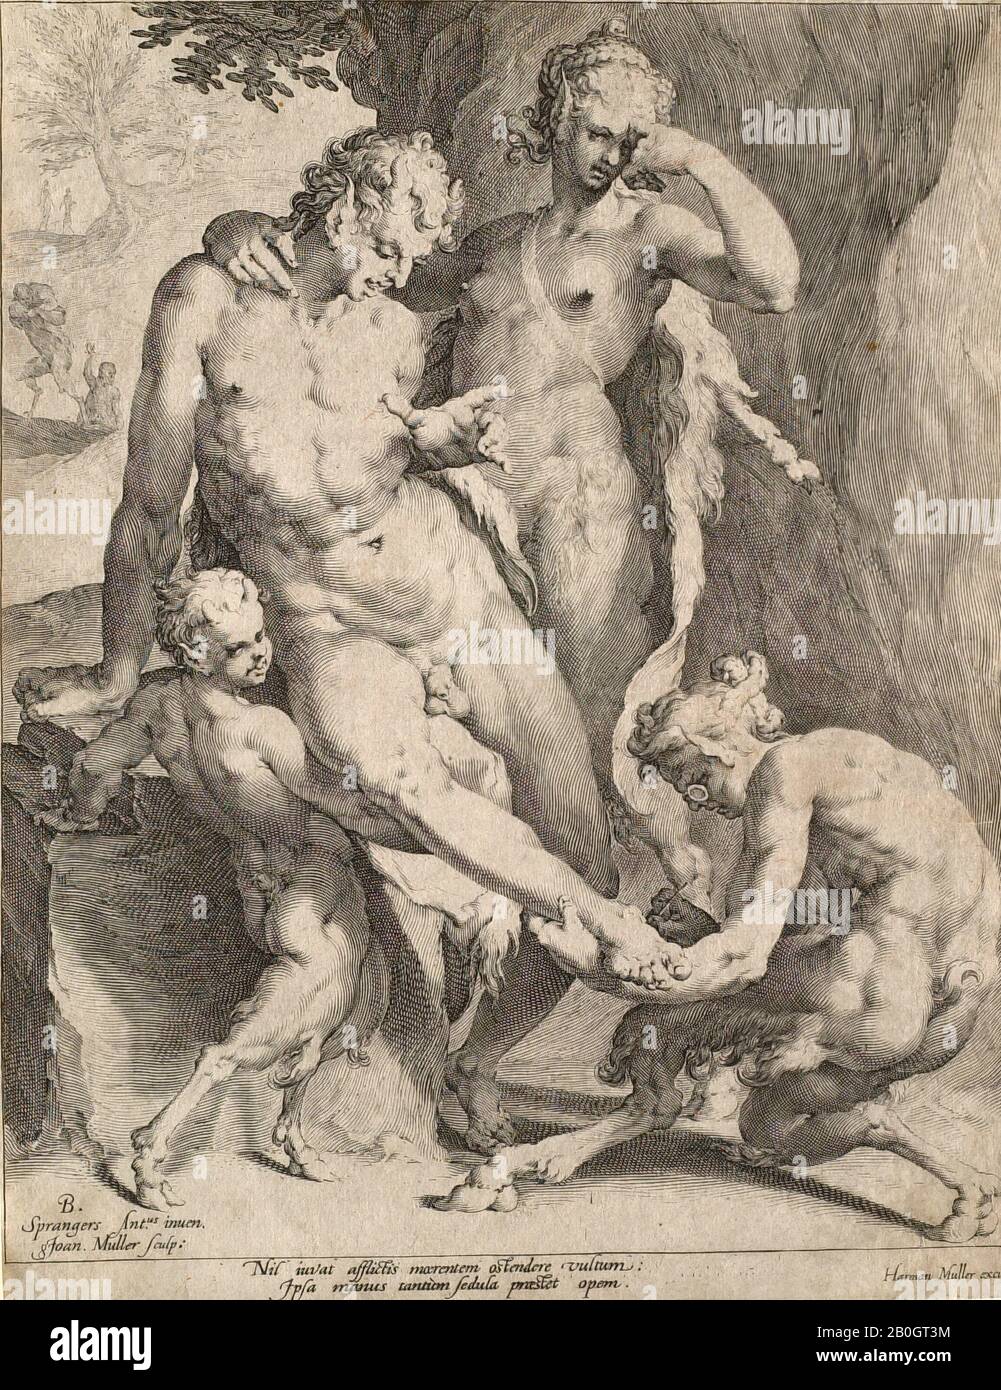 Jan Harmensz Muller, Dutch, 1571–1628, After Bartholomaeus Spranger, (Flemish, 1546–1611), A Satyr Pulling a Thorn out of the Foot of a Faun, Engraving on paper, image: 10 7/16 x 8 3/16 in. (26.5 x 20.8 cm Stock Photo